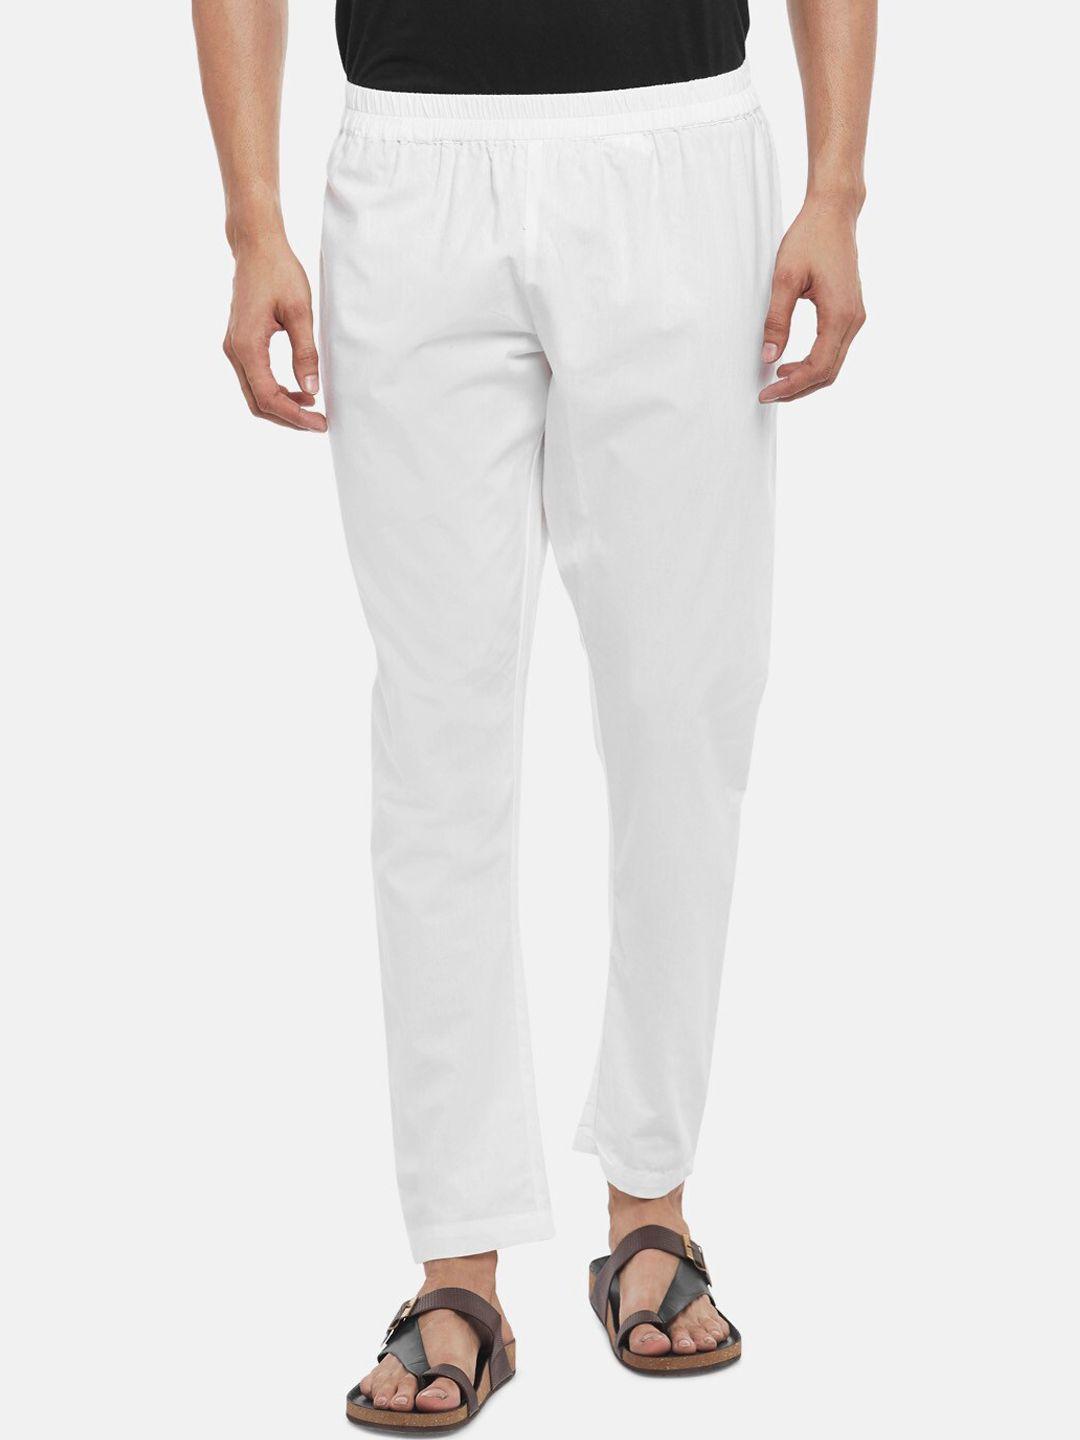 indus route by pantaloons men off white solid cotton pyjama